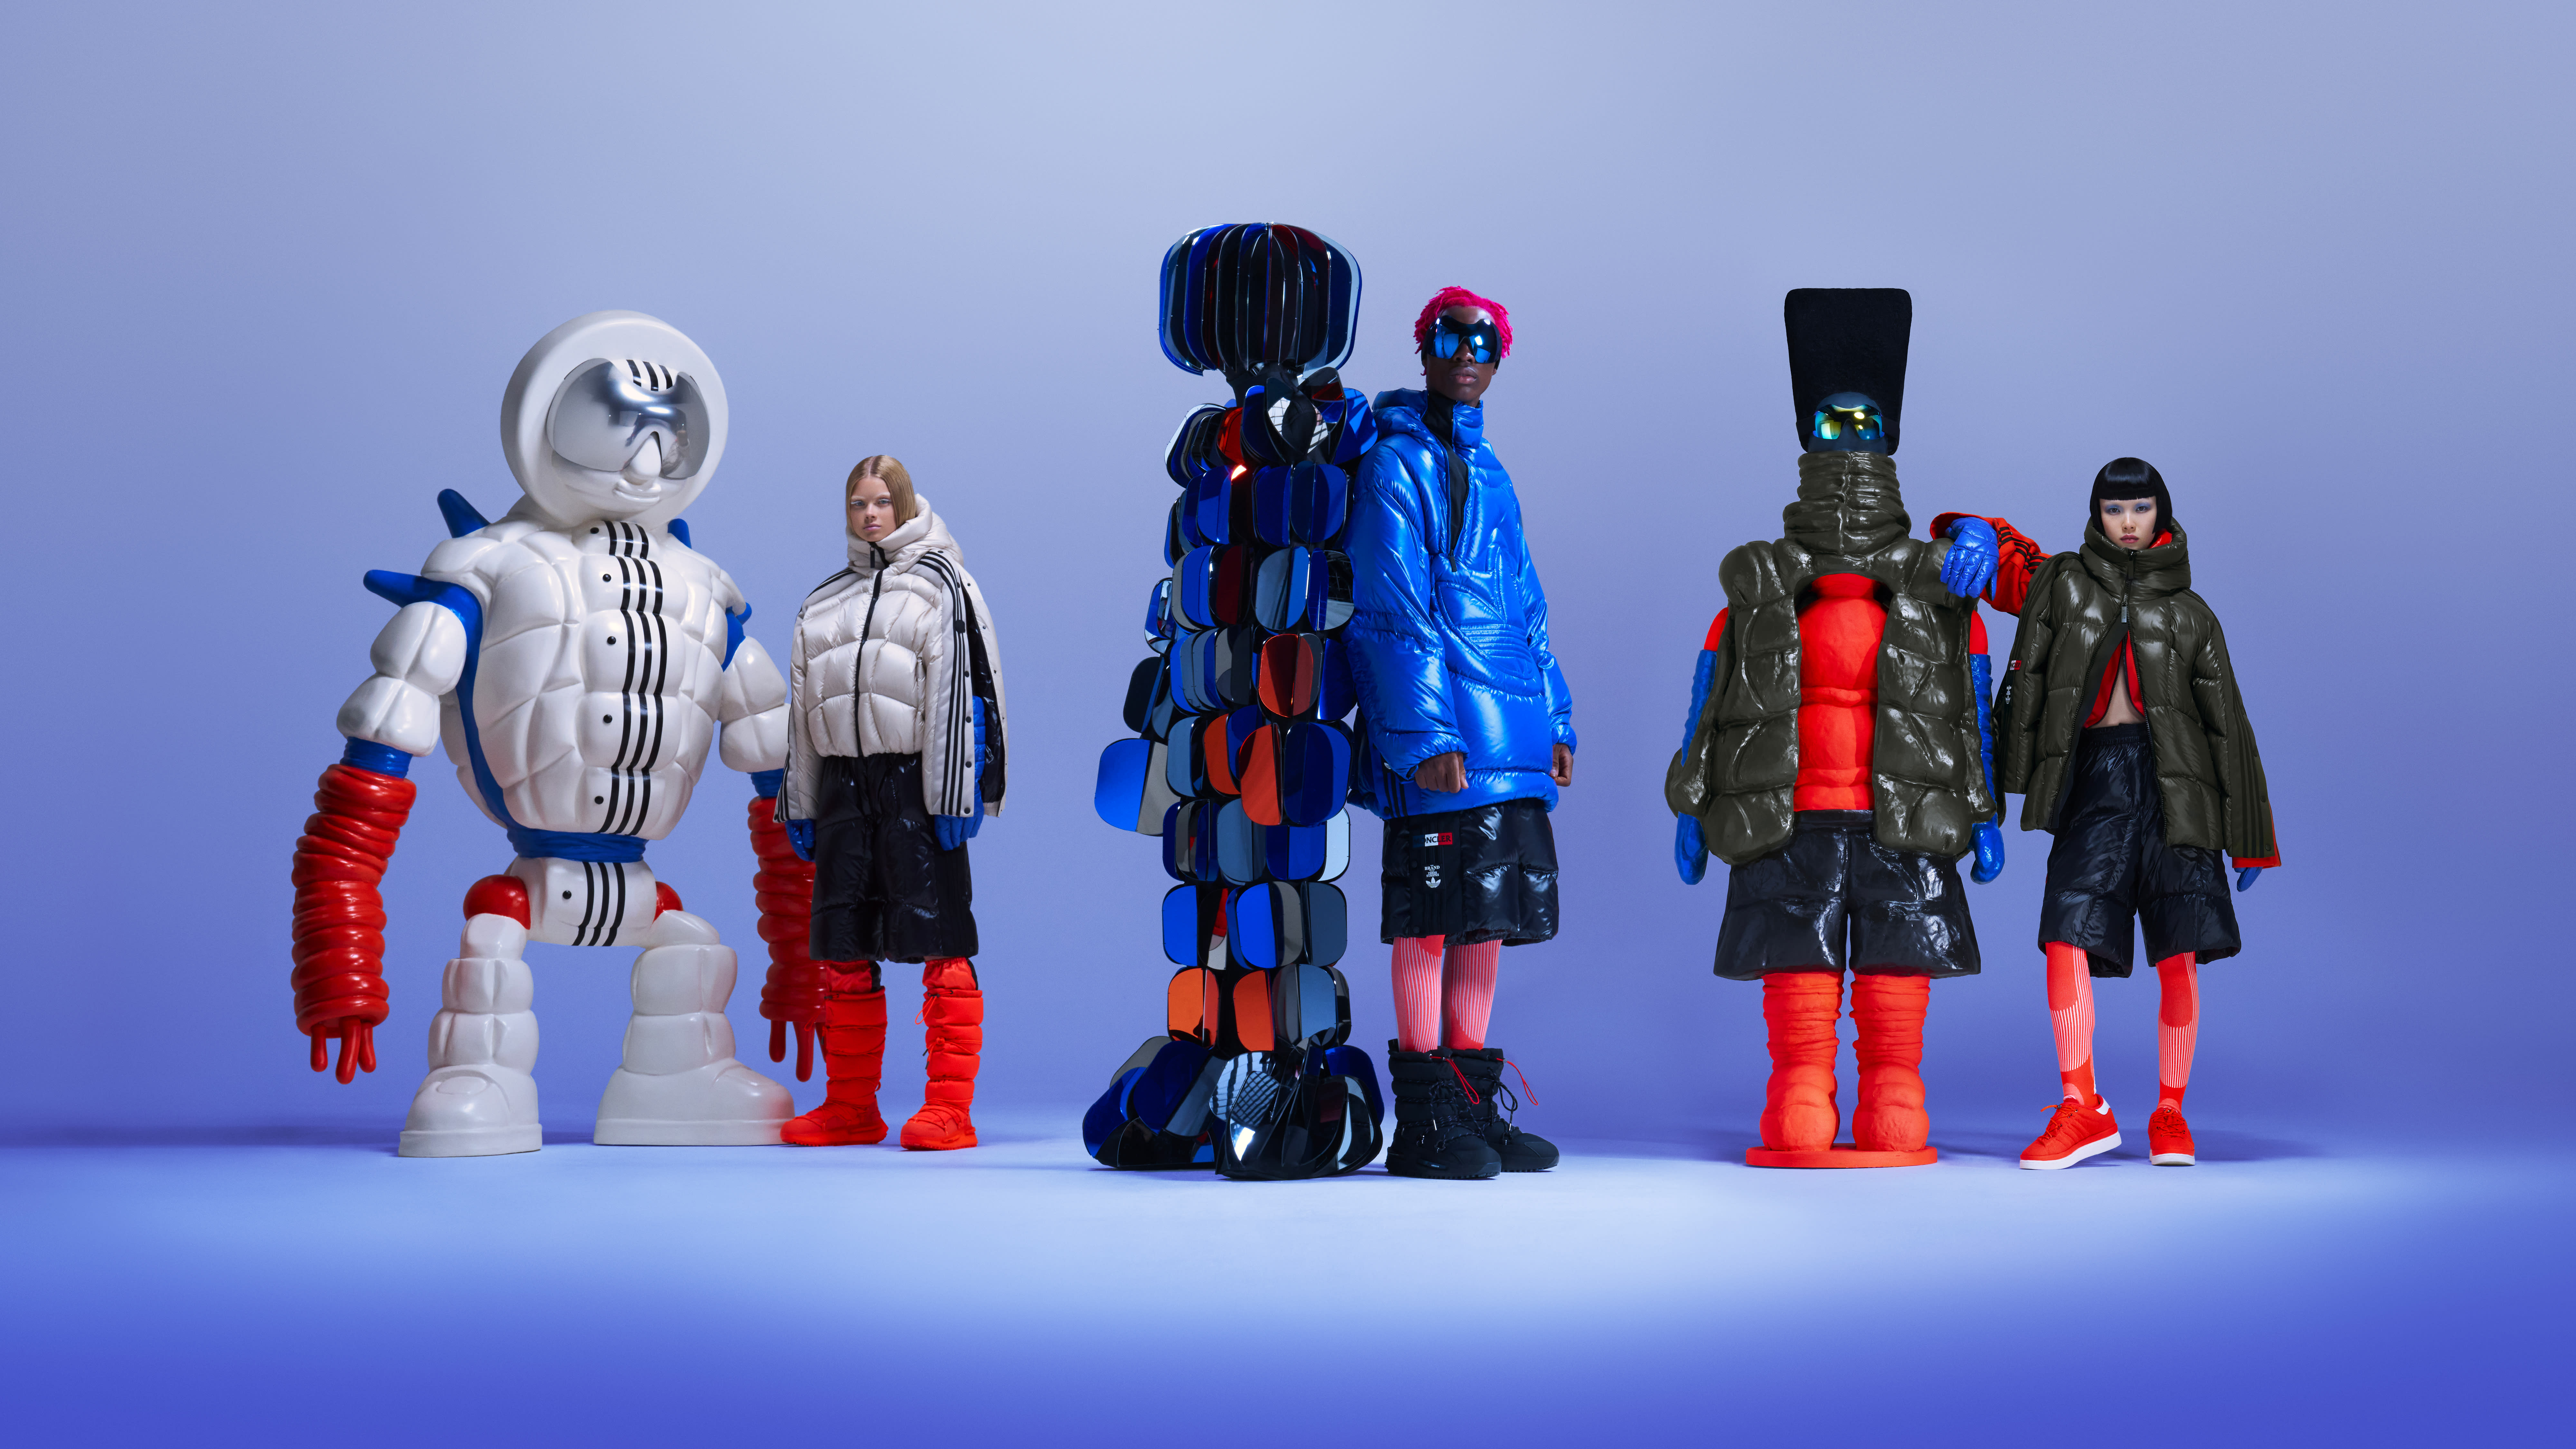 Moncler: Brand Overview